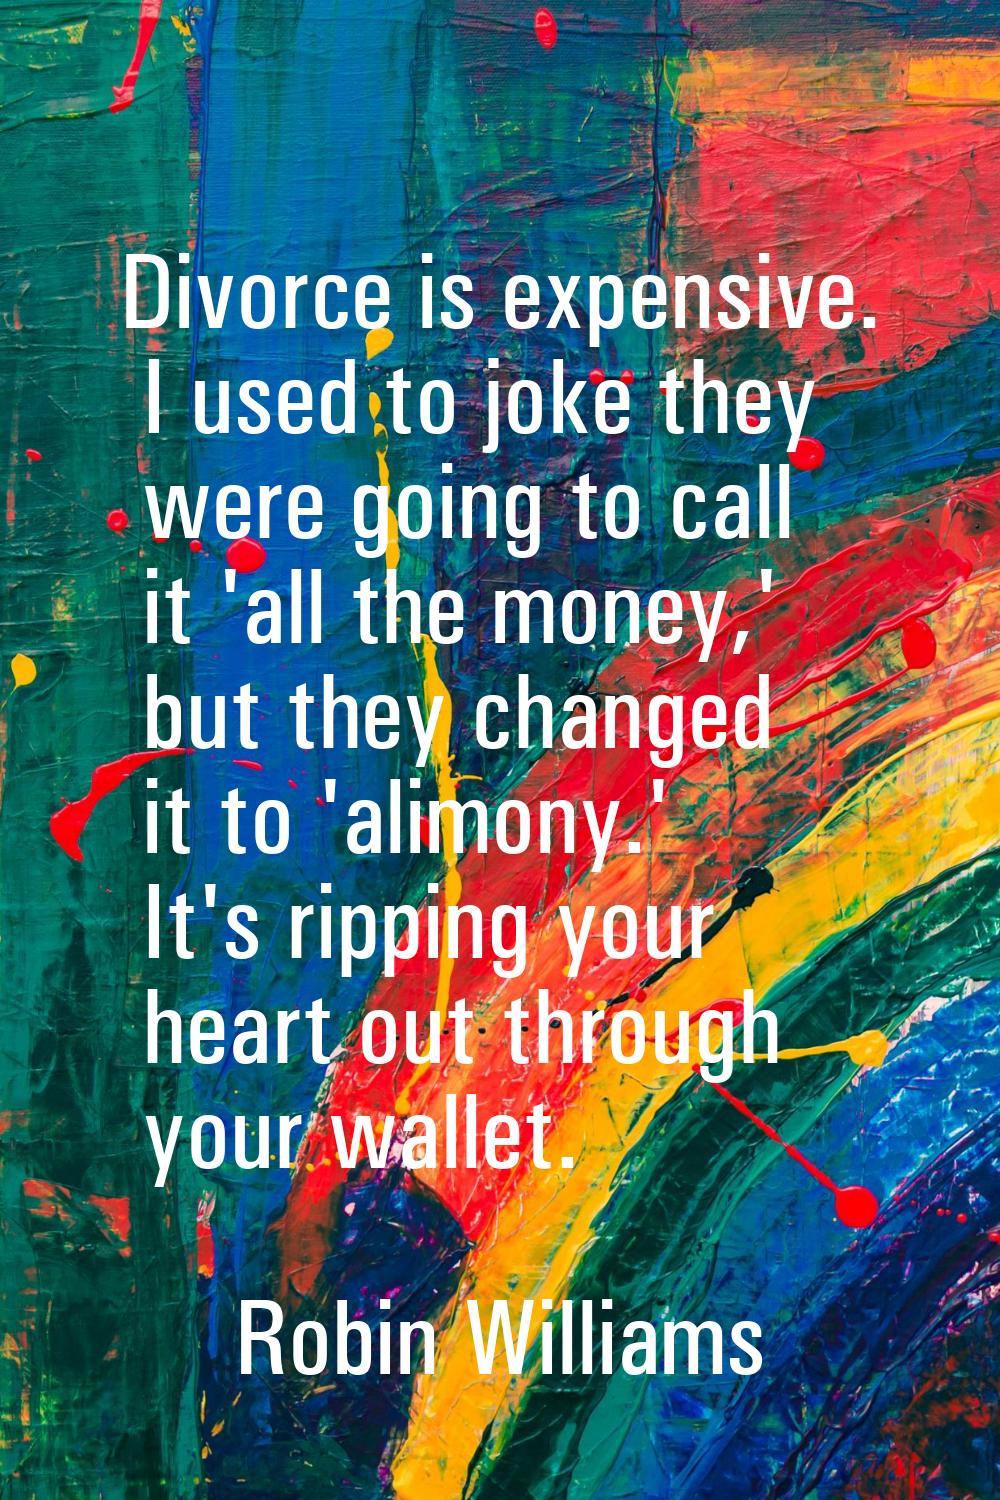 Divorce is expensive. I used to joke they were going to call it 'all the money,' but they changed i